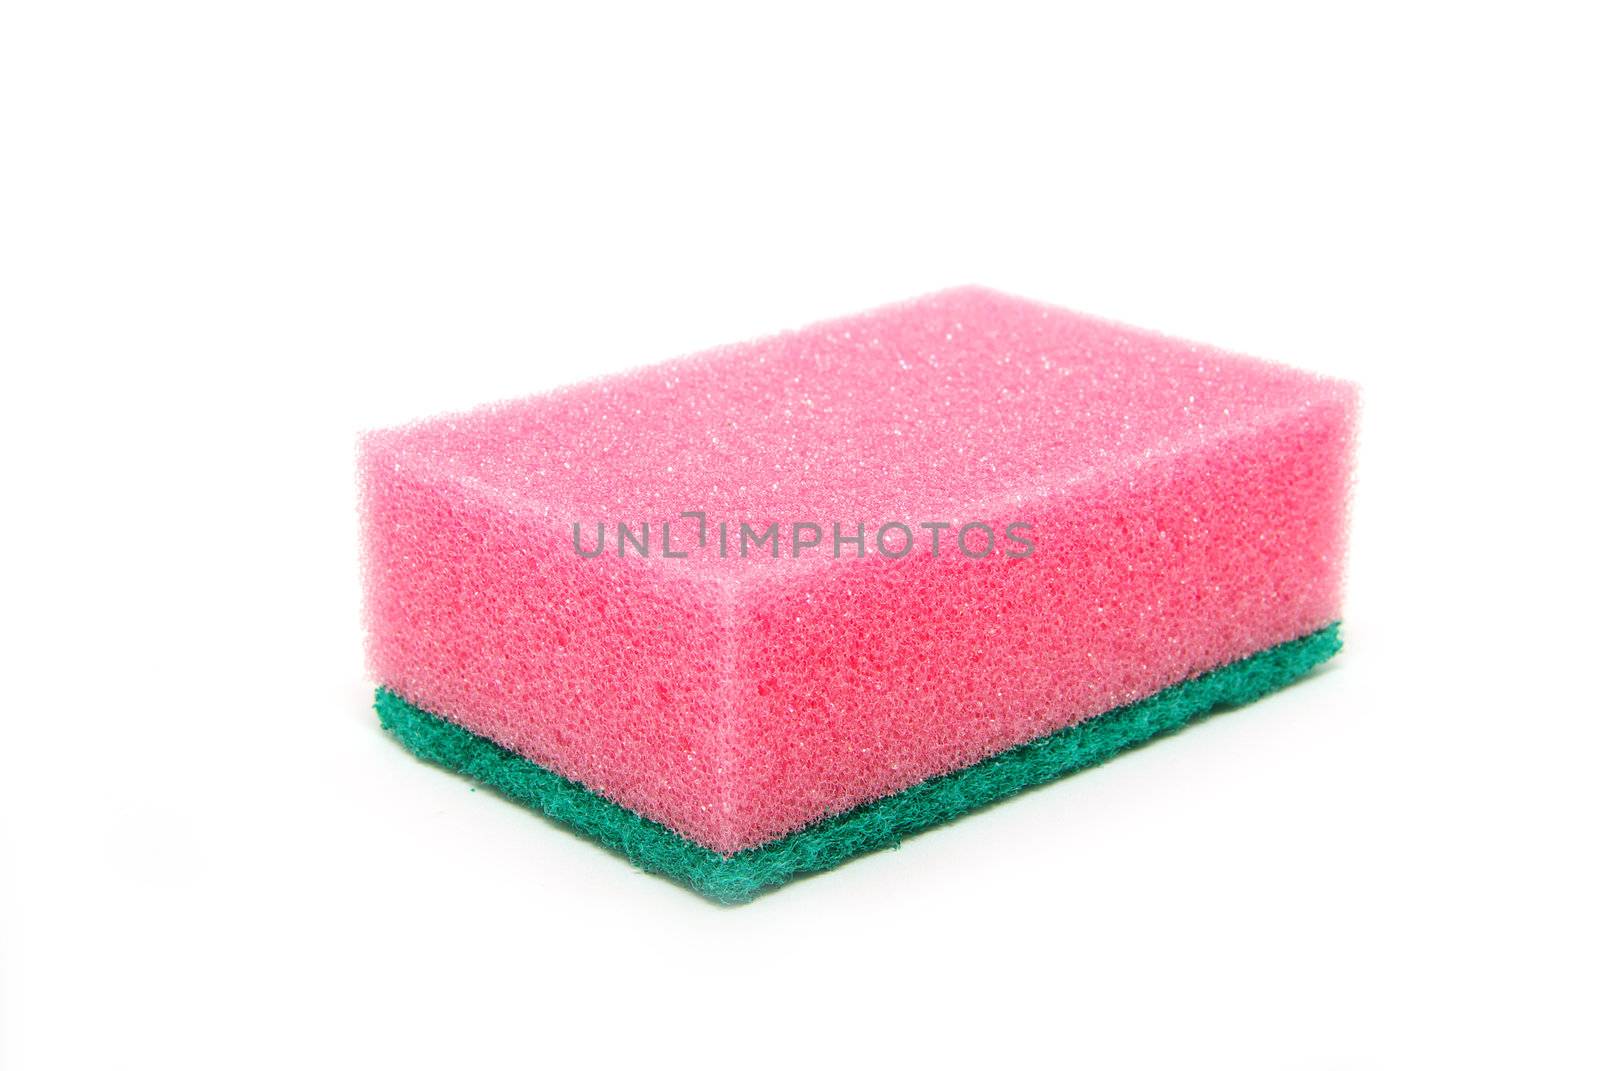 kitchen sponges isolated on a white background